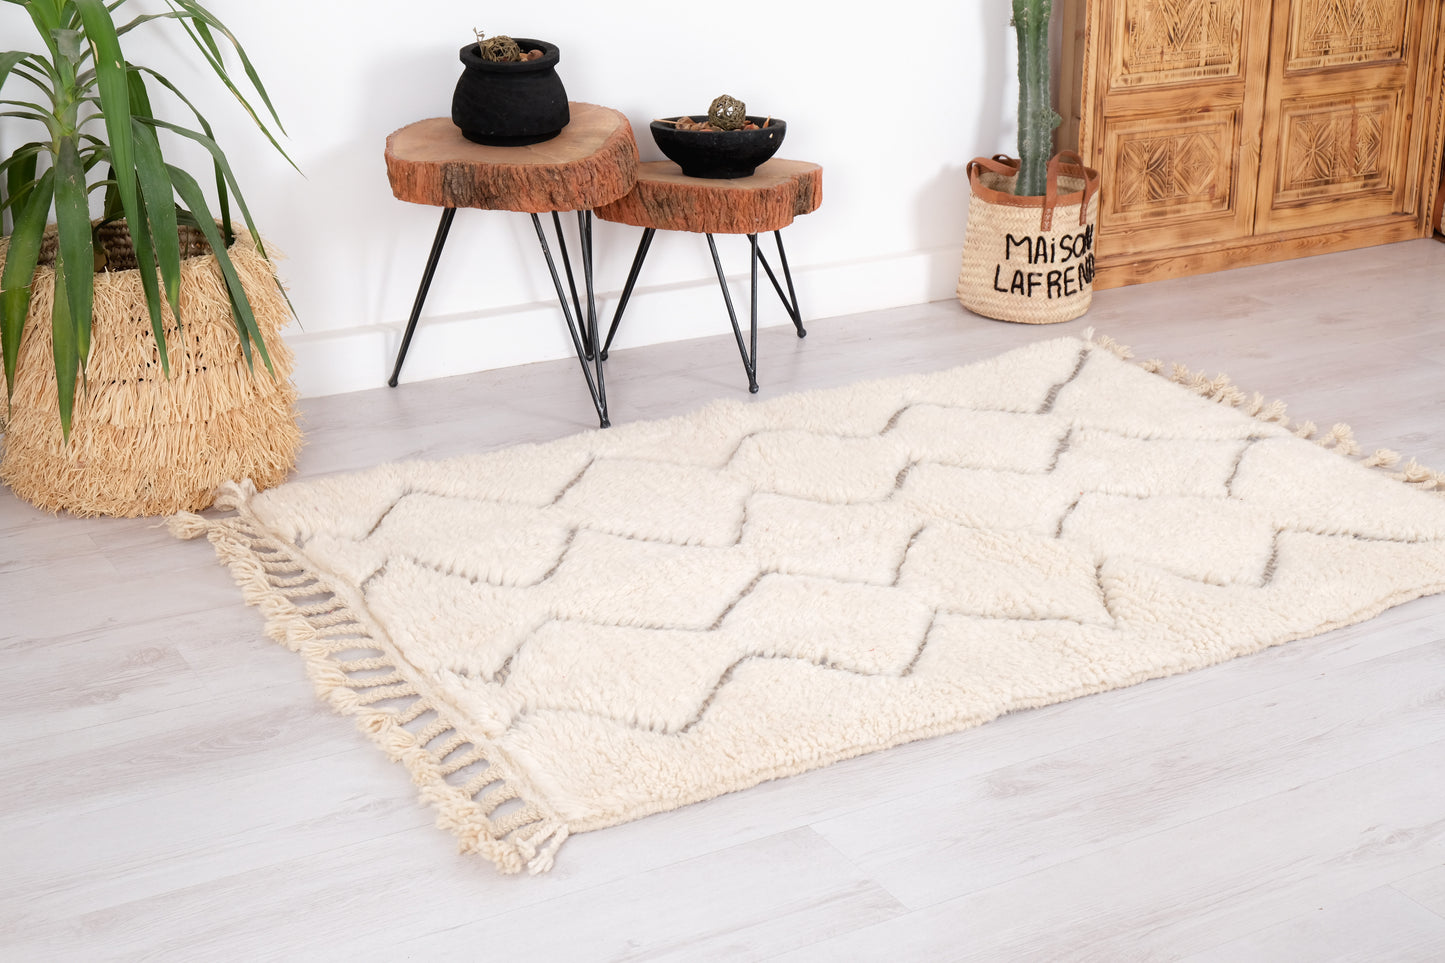 Beni Ourain Rug 3x5 ft – Ref. 1776